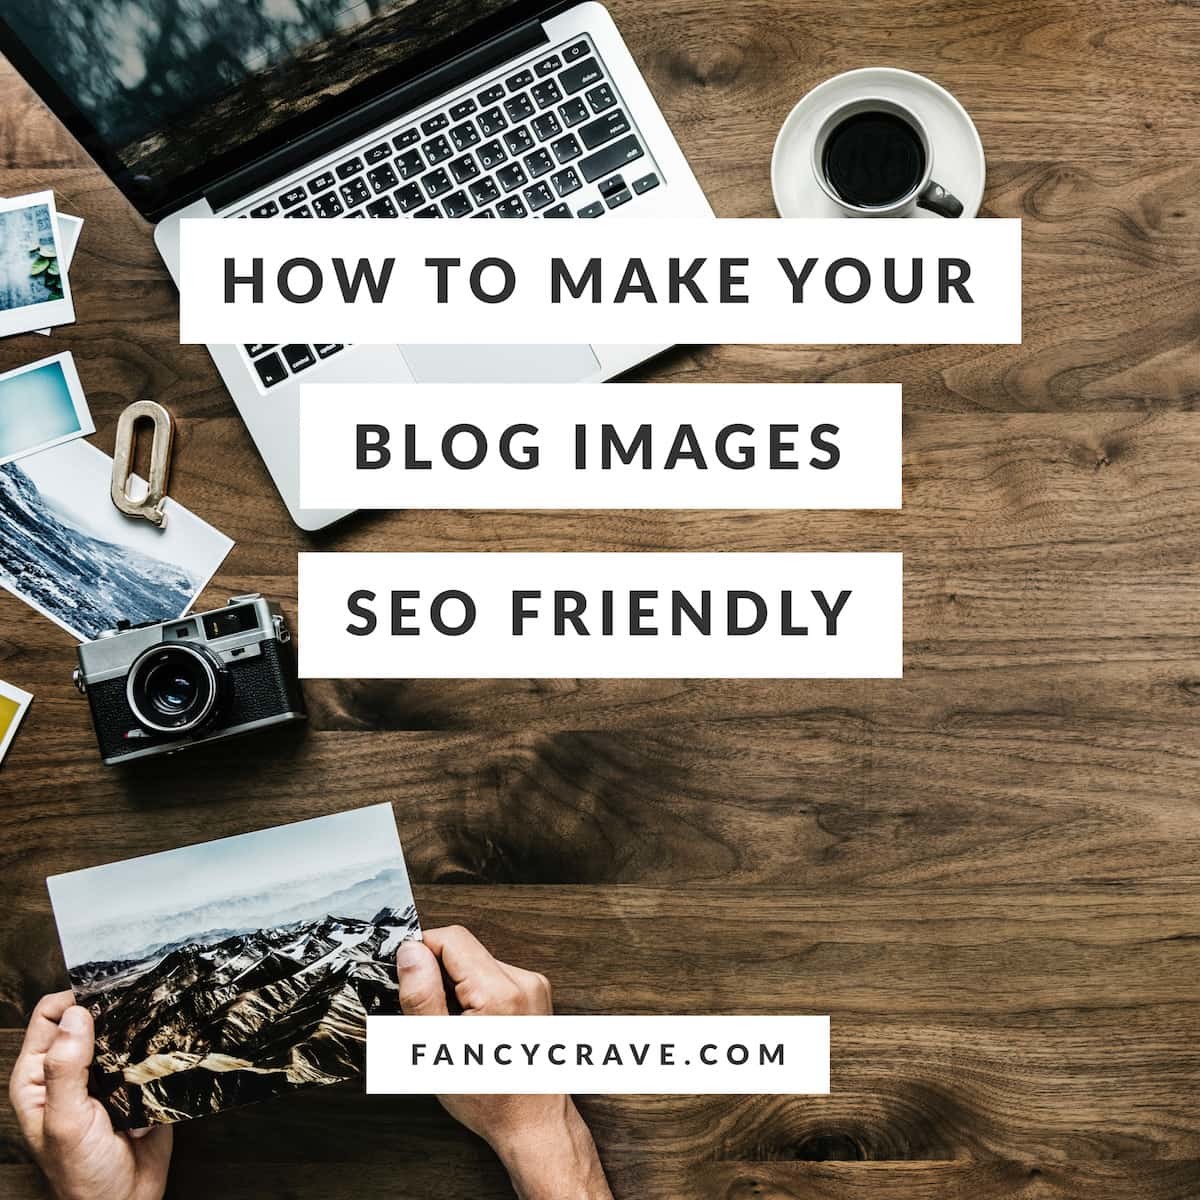 How to Make Your Blog Images SEO friendly